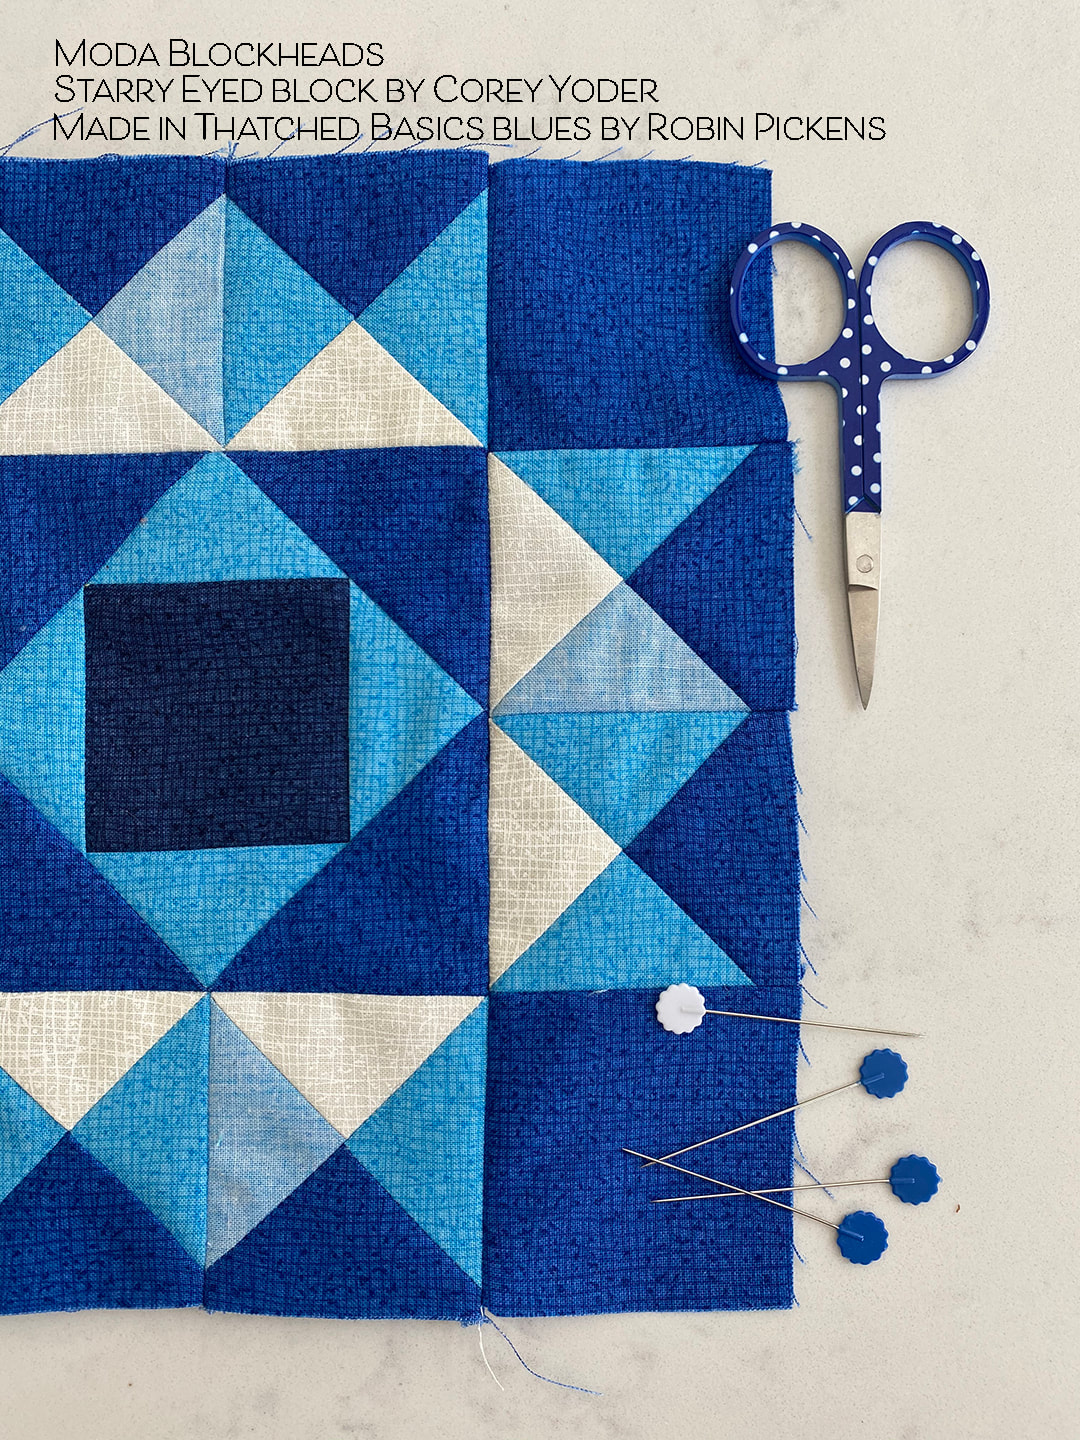 Moda Blockheads Starry Eyed block in Thatched blues